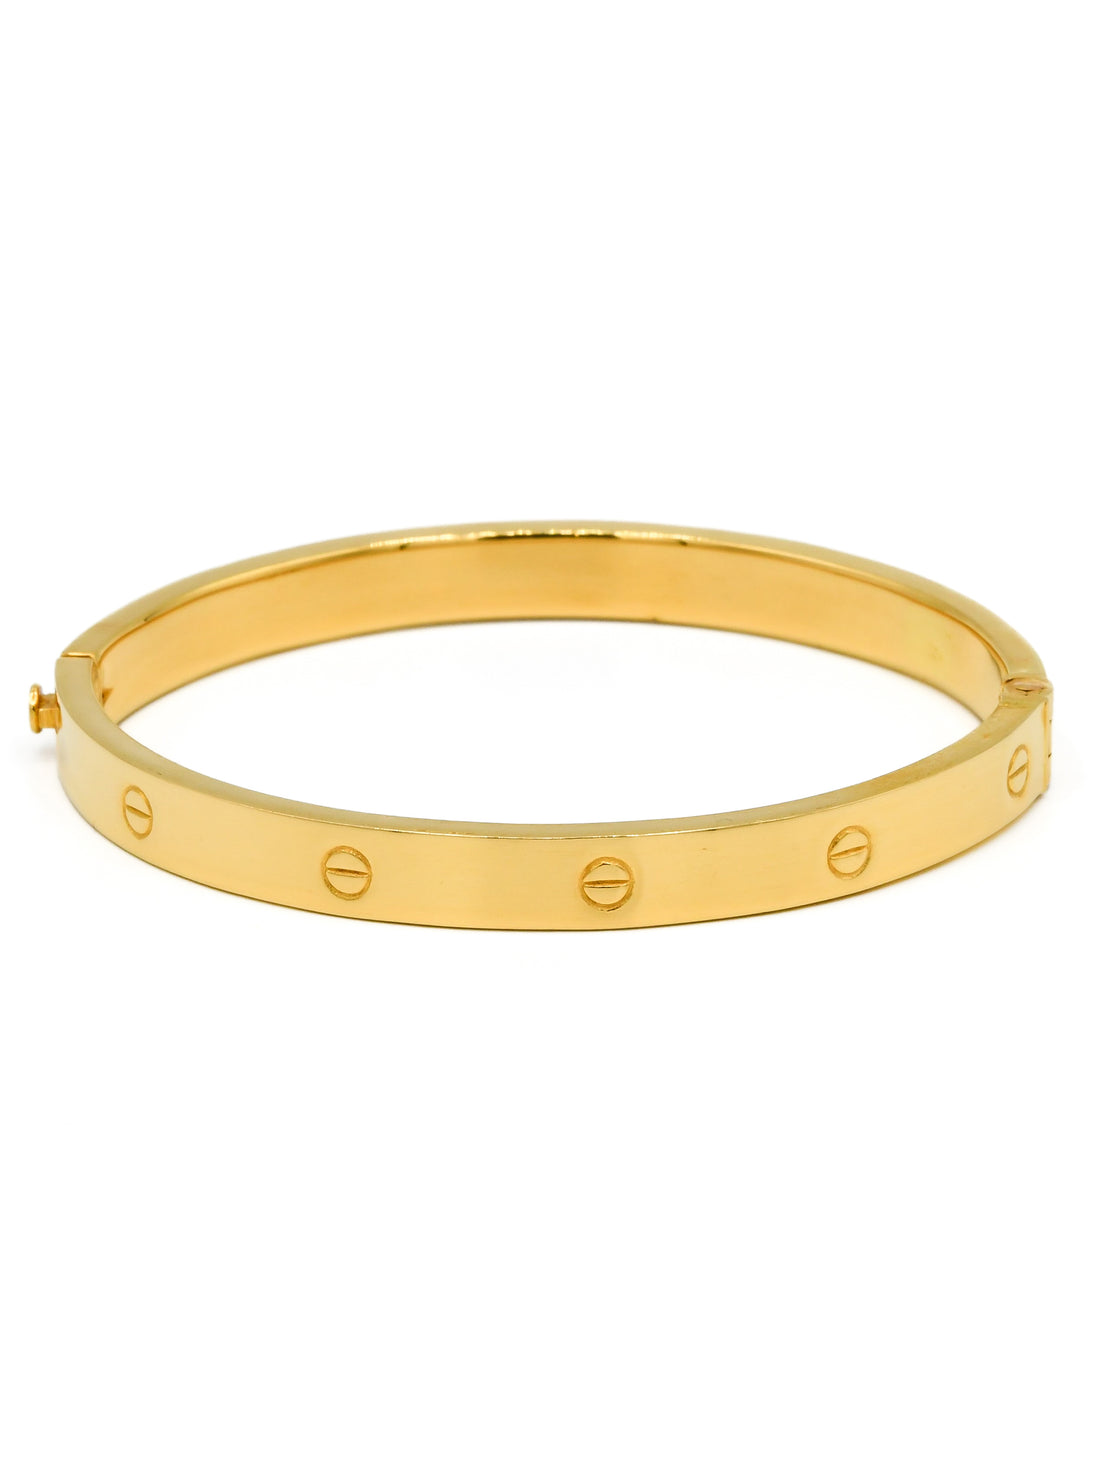 22ct Gold Oval Shape 1 Piece Bangle - Roop Darshan